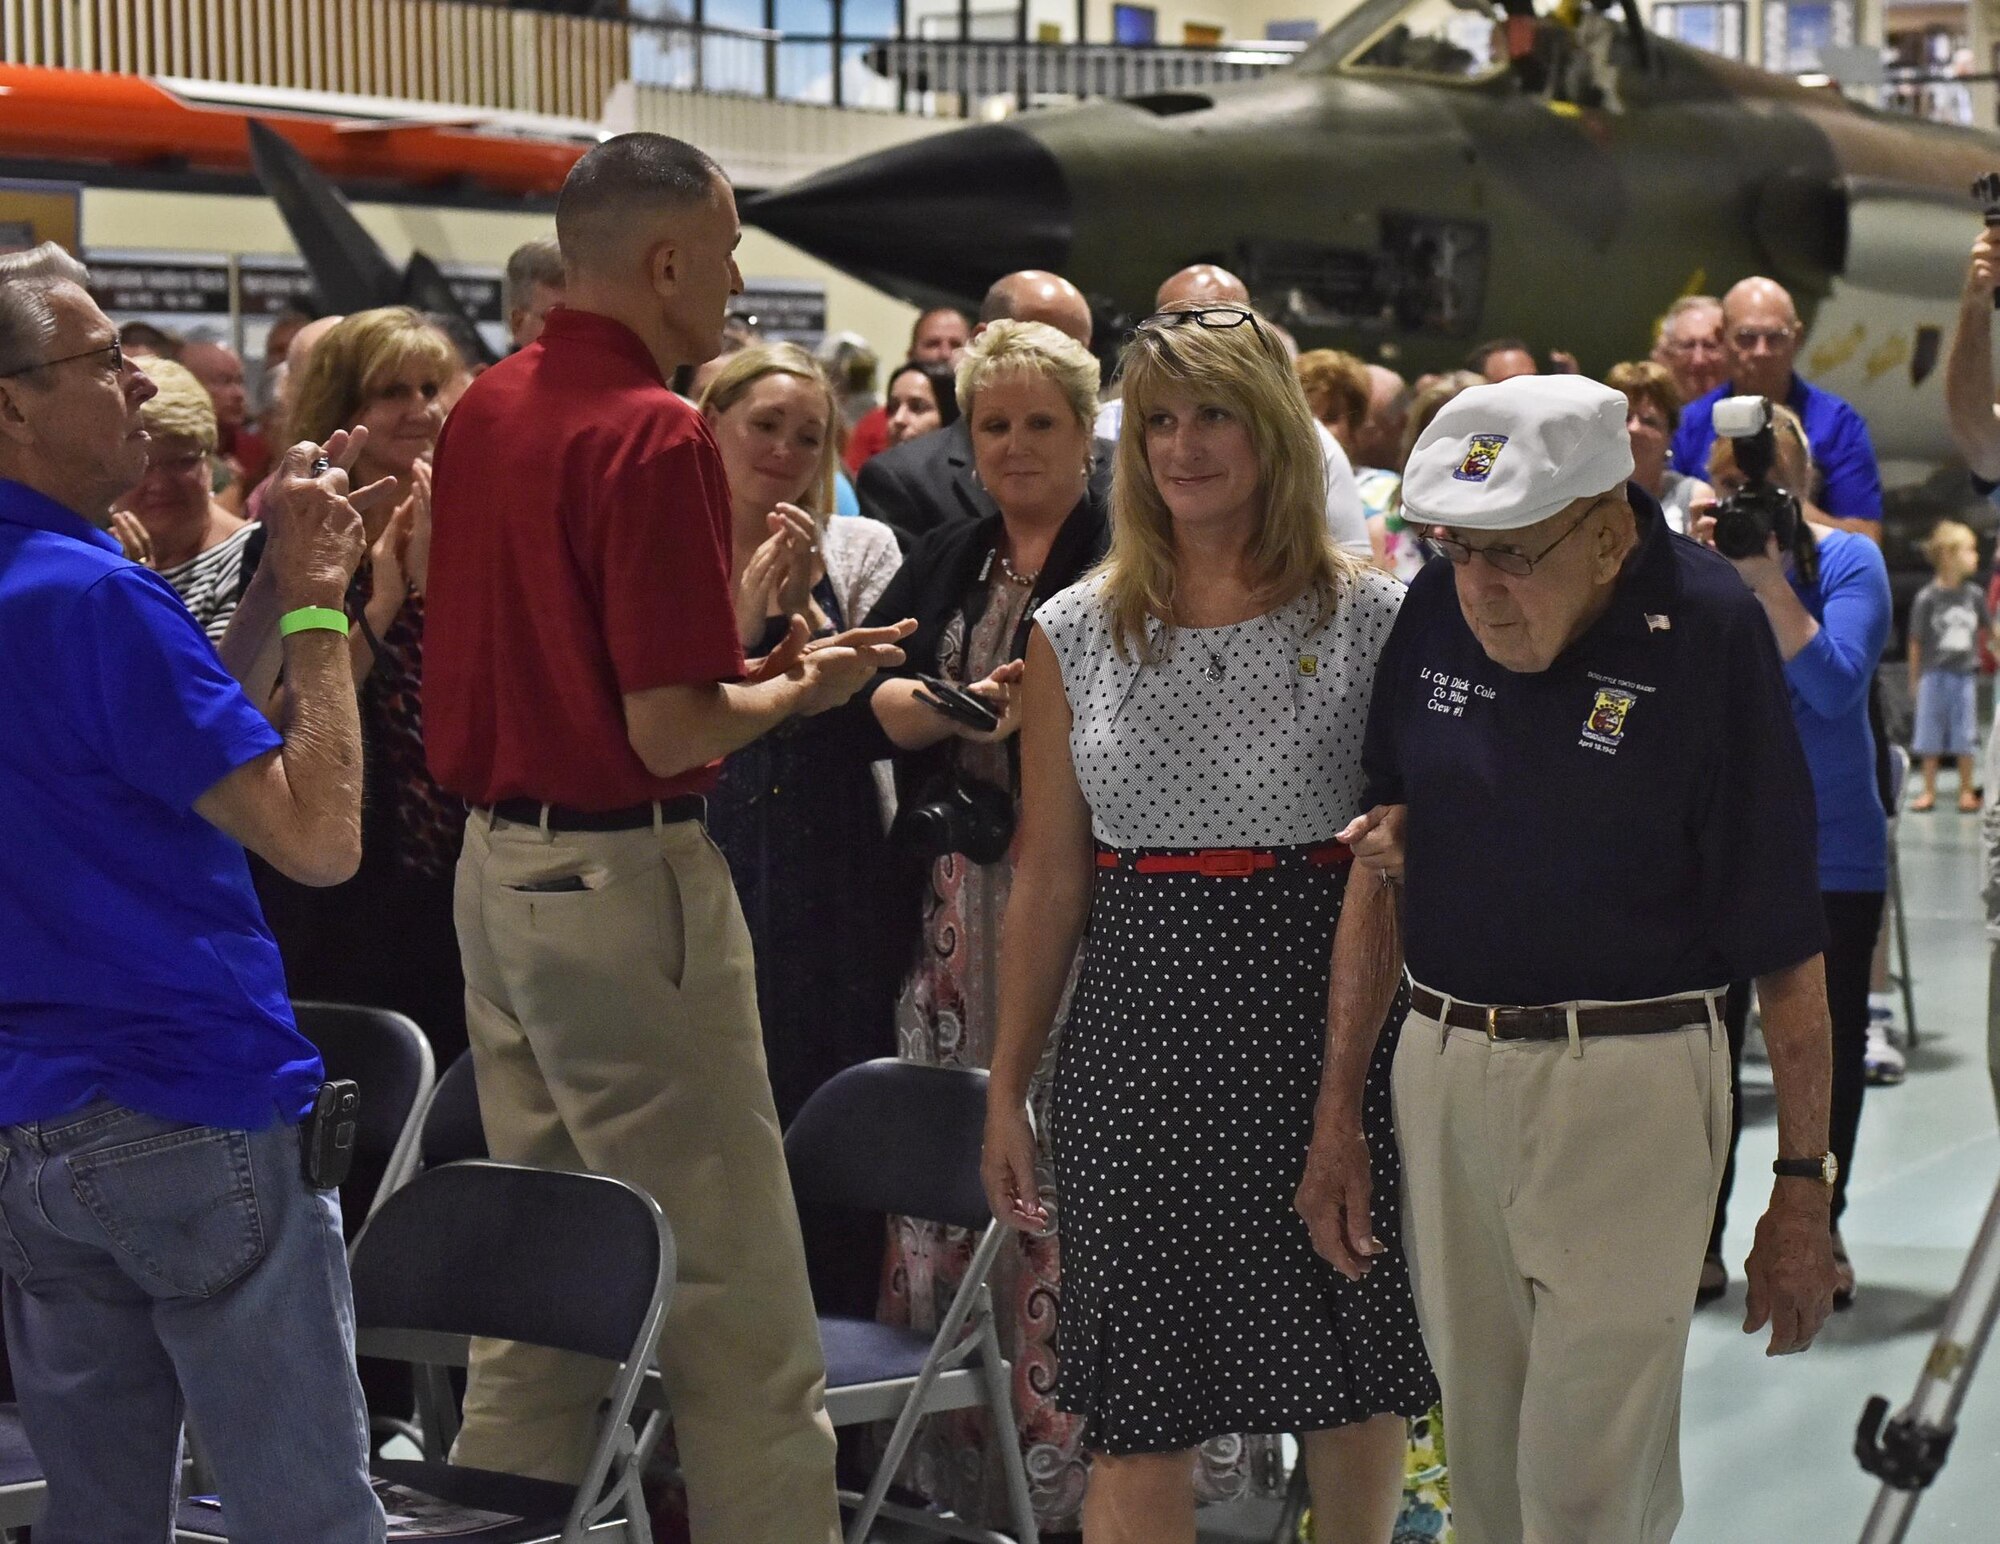 Lt. Col. (ret.) Richard “Dick” Cole enters the U.S. Air Force Armament Museum on Eglin Air Force Base, Fla., July 30, 2016. Cole assited in dedicating the newly remodeled Doolittle Raider's exhibit. (U.S. Air Force photo/Staff Sgt. Melanie Holochwost)